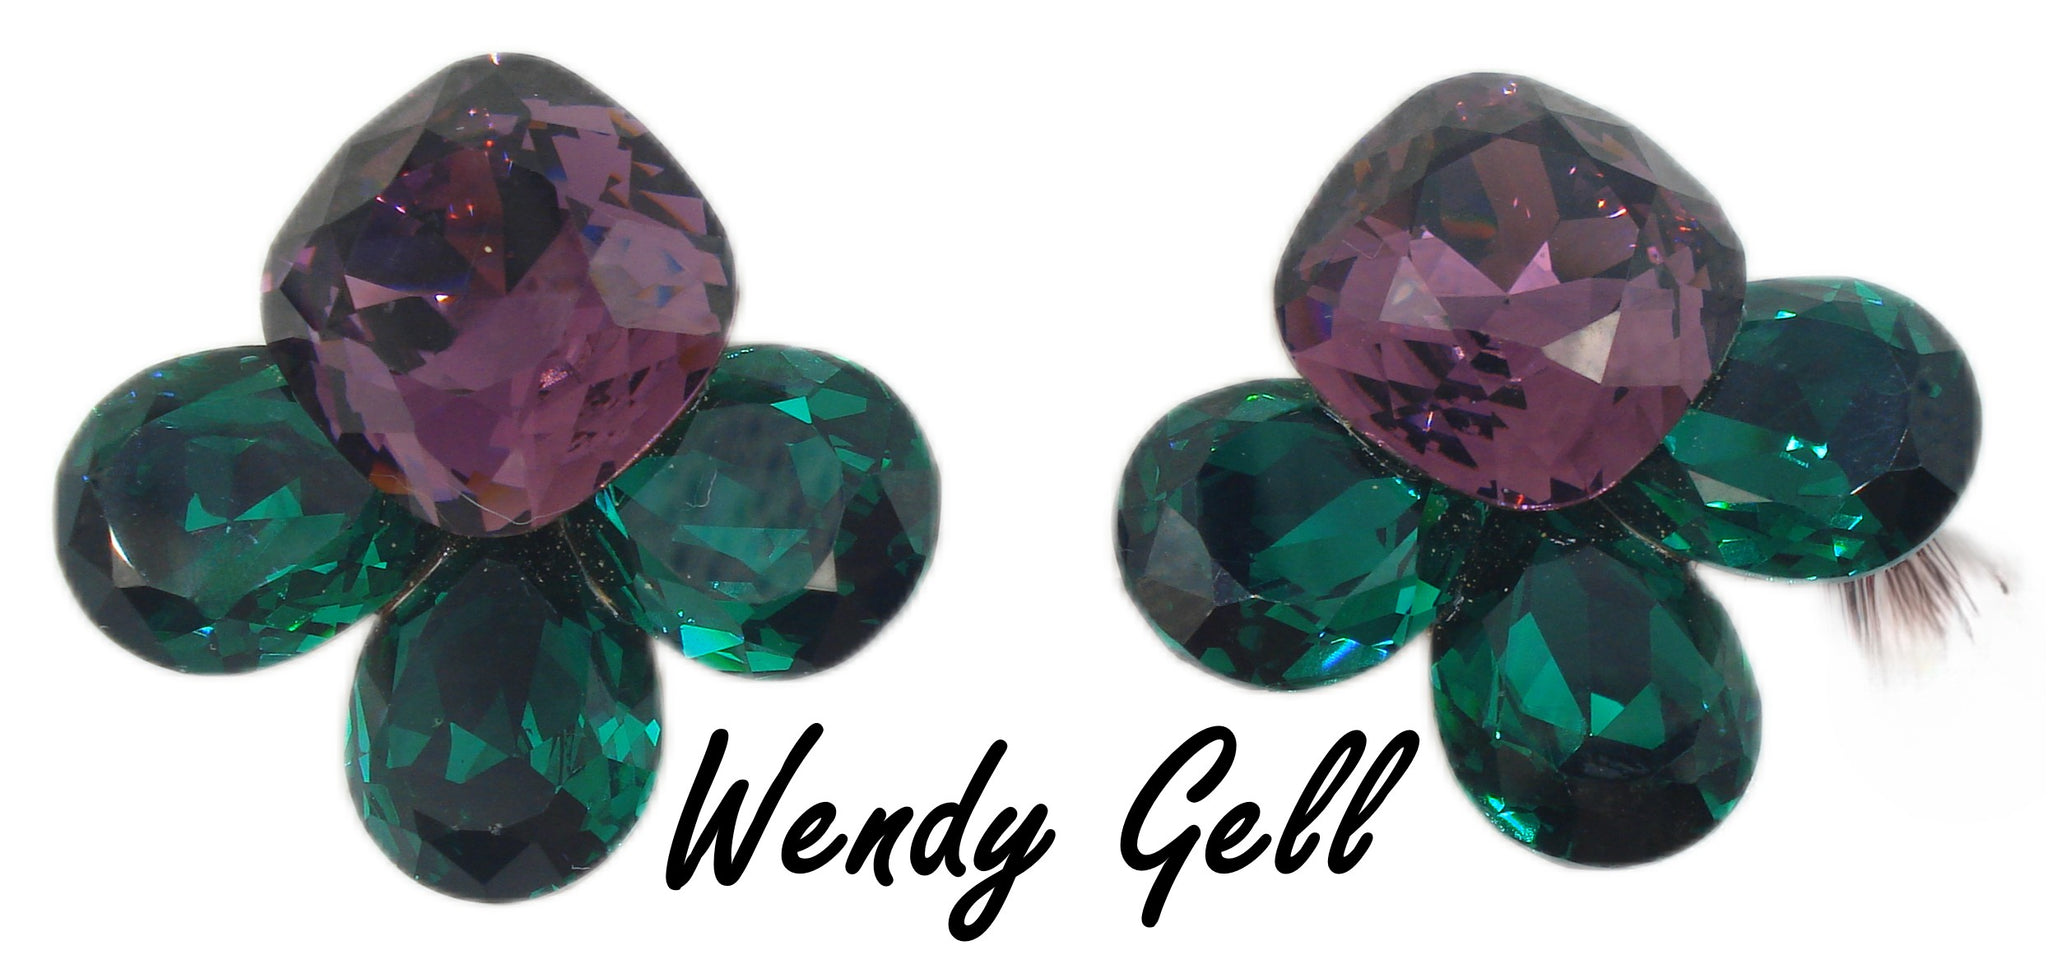 WENDY GELL-Earrings Amethyst Antique Squares Emerald Pendeloques 1.5"